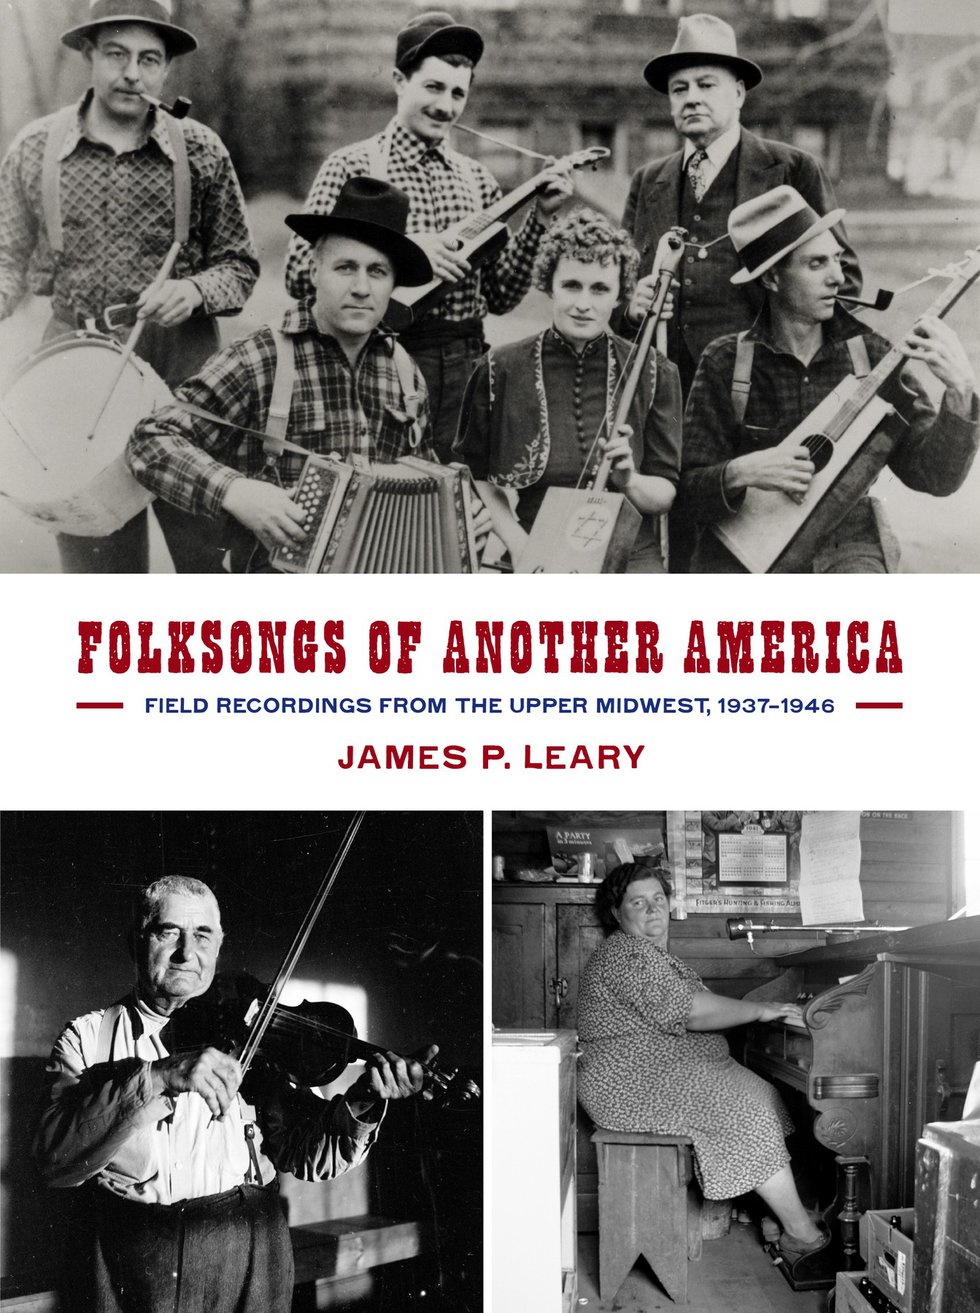 leary-folksongs-of-another-america-c.jpg.jpe